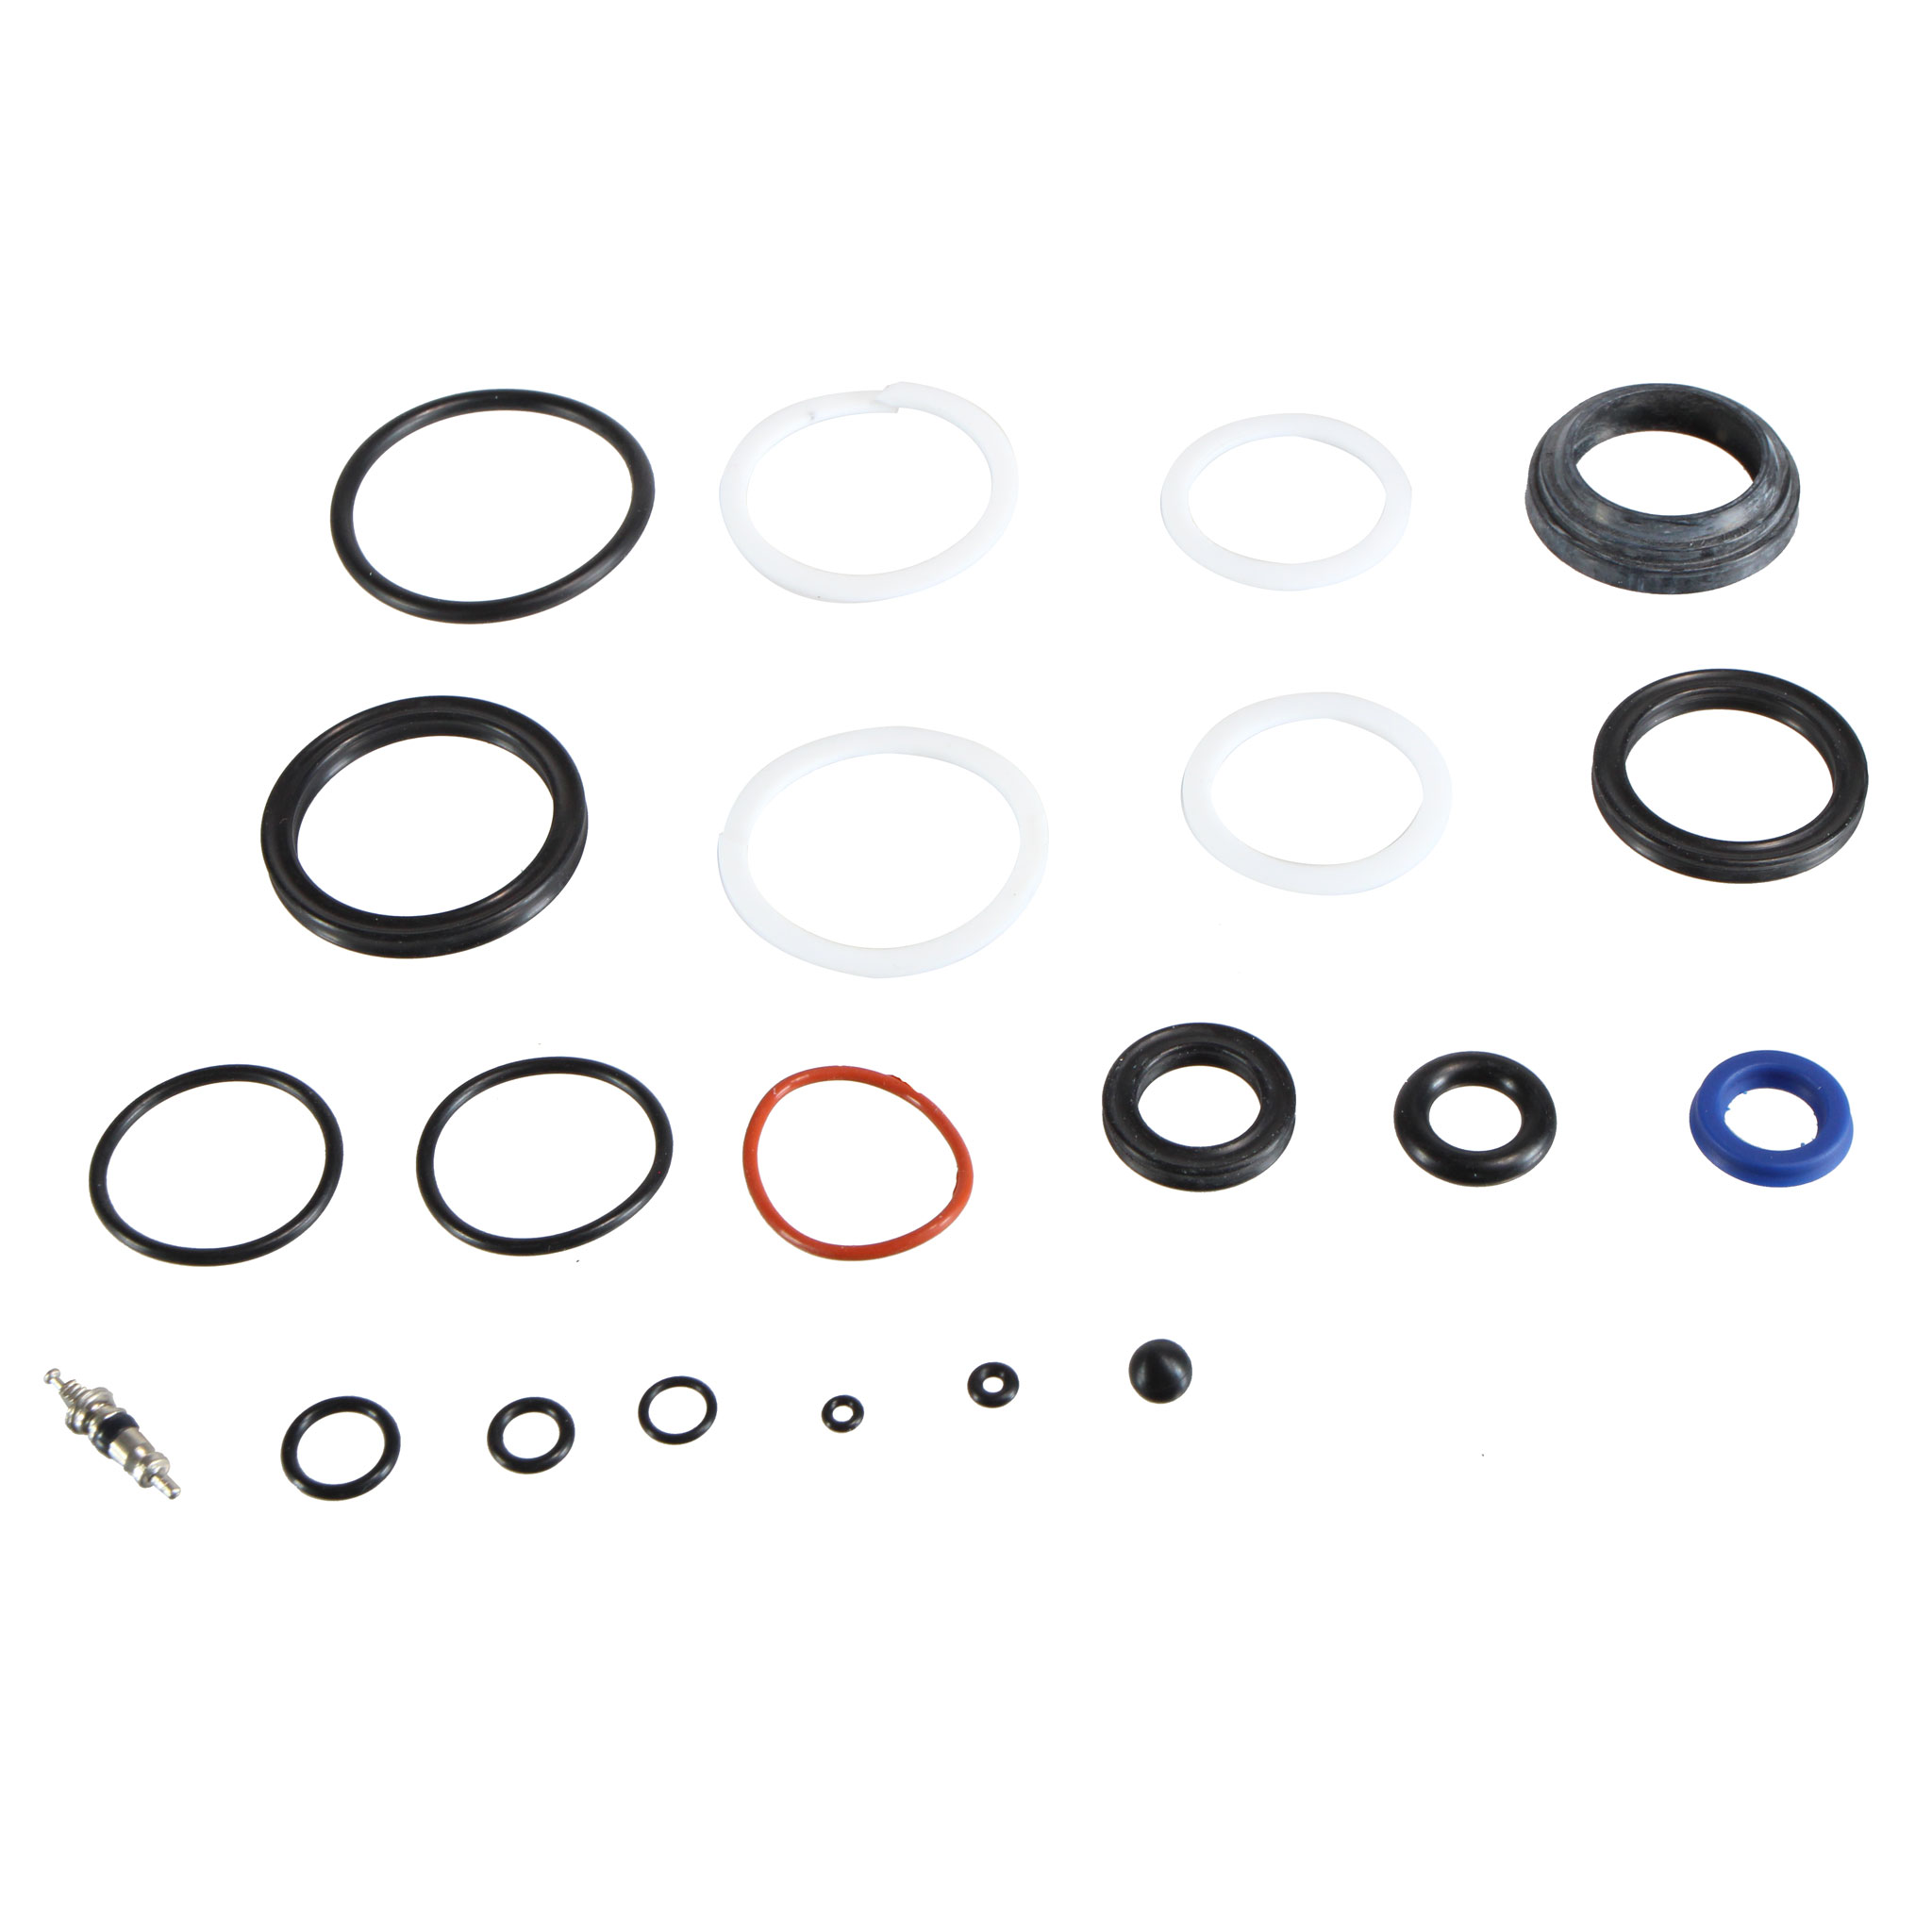 Anso Suspension X-Fusion Microlite Shock, Air Can/Damper Service Kit